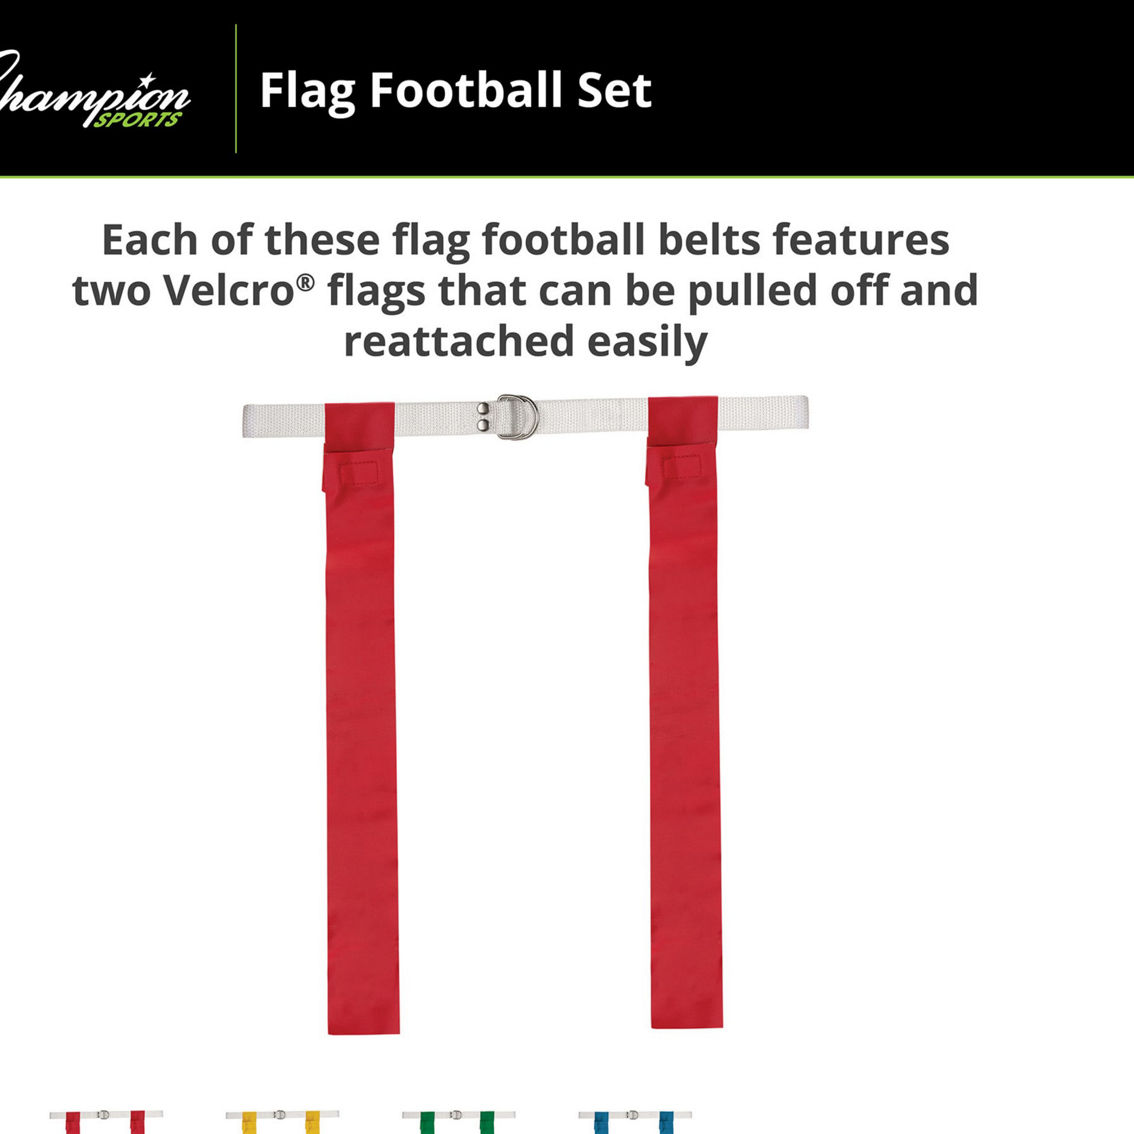 Champion Sports Flag Football Set, Red, Pack of 12 - Image 4 of 5